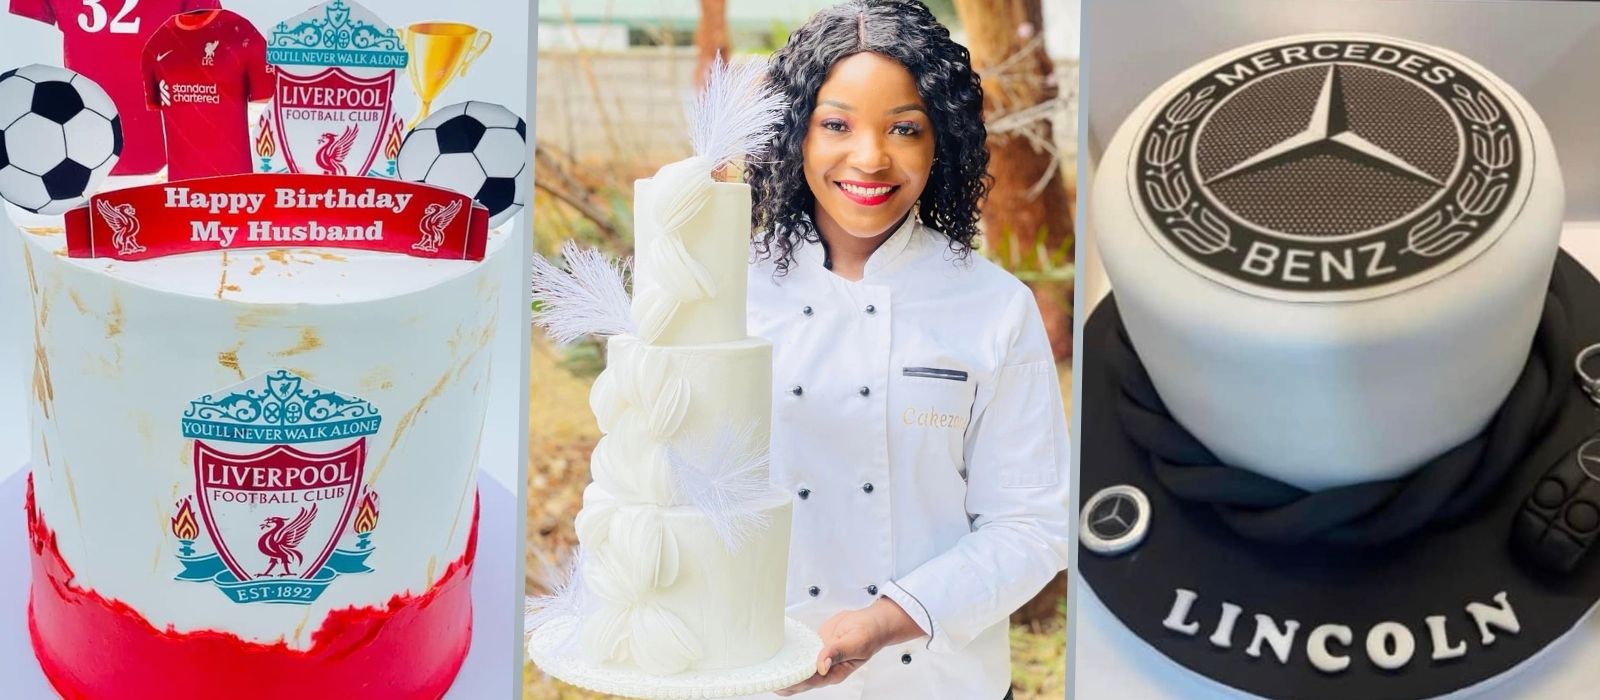 Cakezone: A rising star in Zimbabwe’s cake and pastry industry